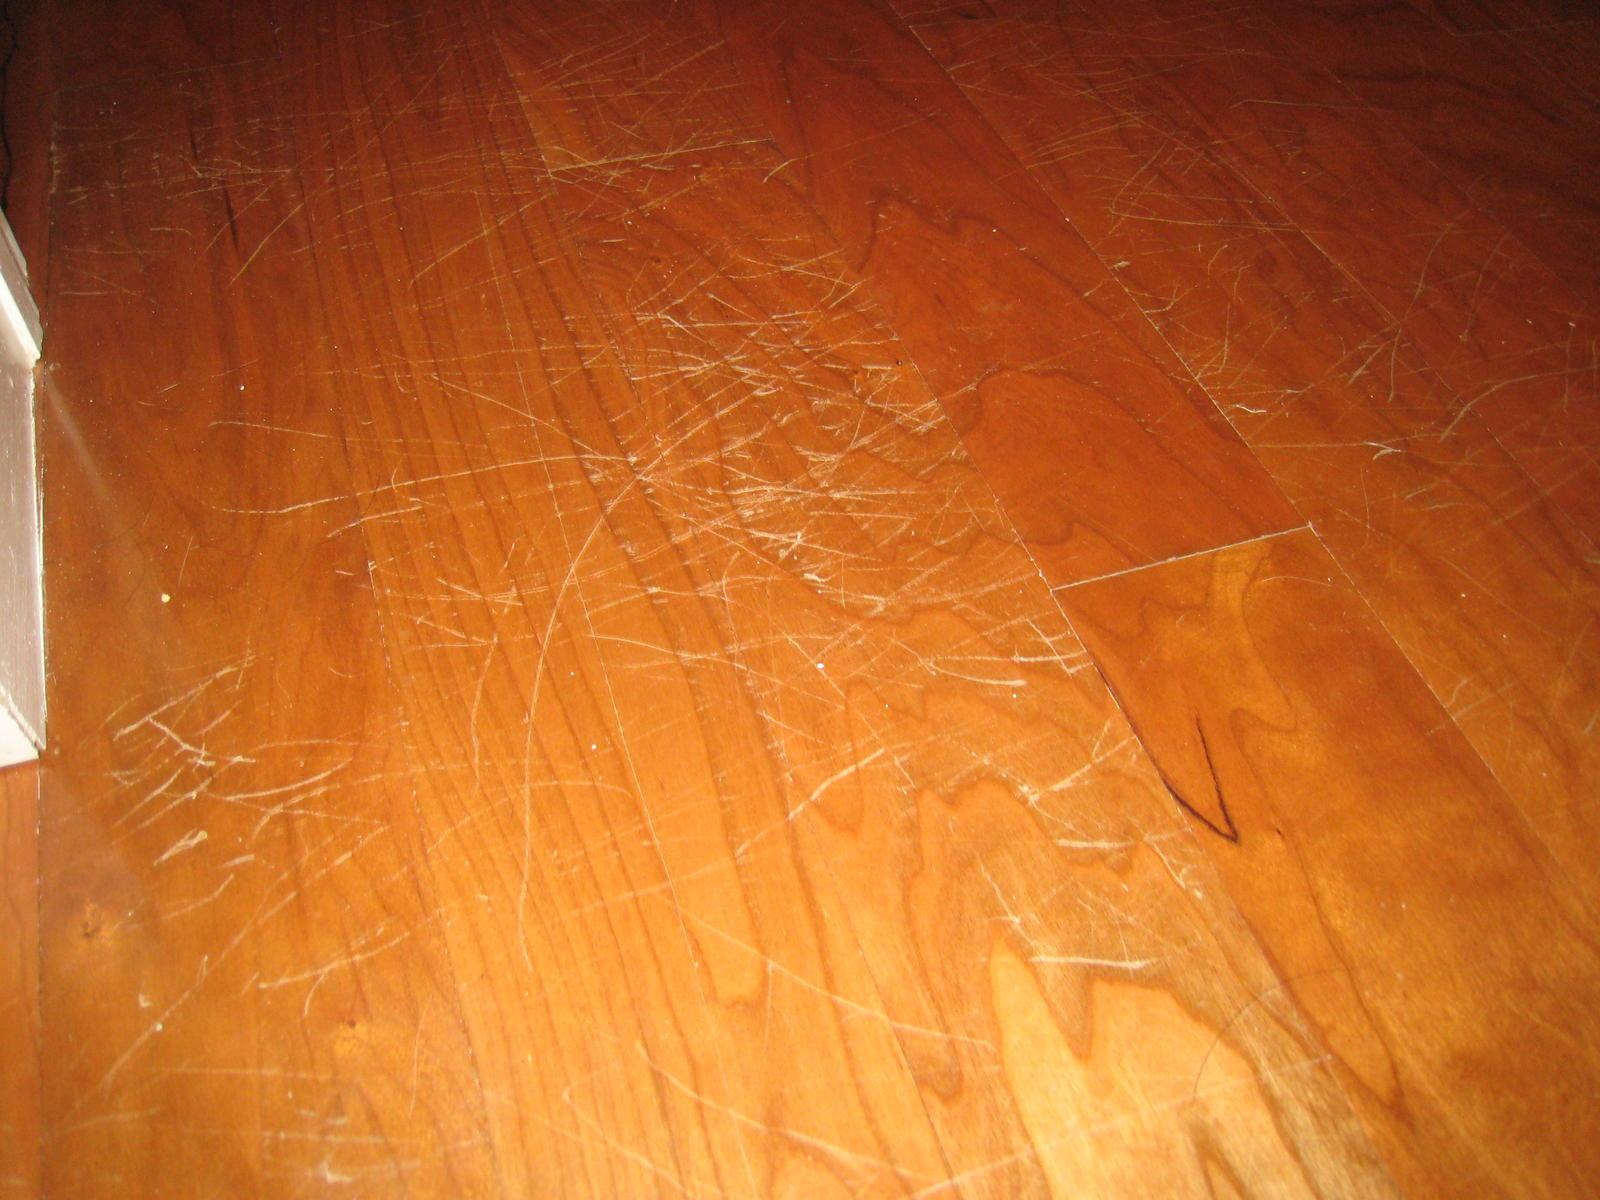 How to Prevent Dog Scratches on Wood Floors